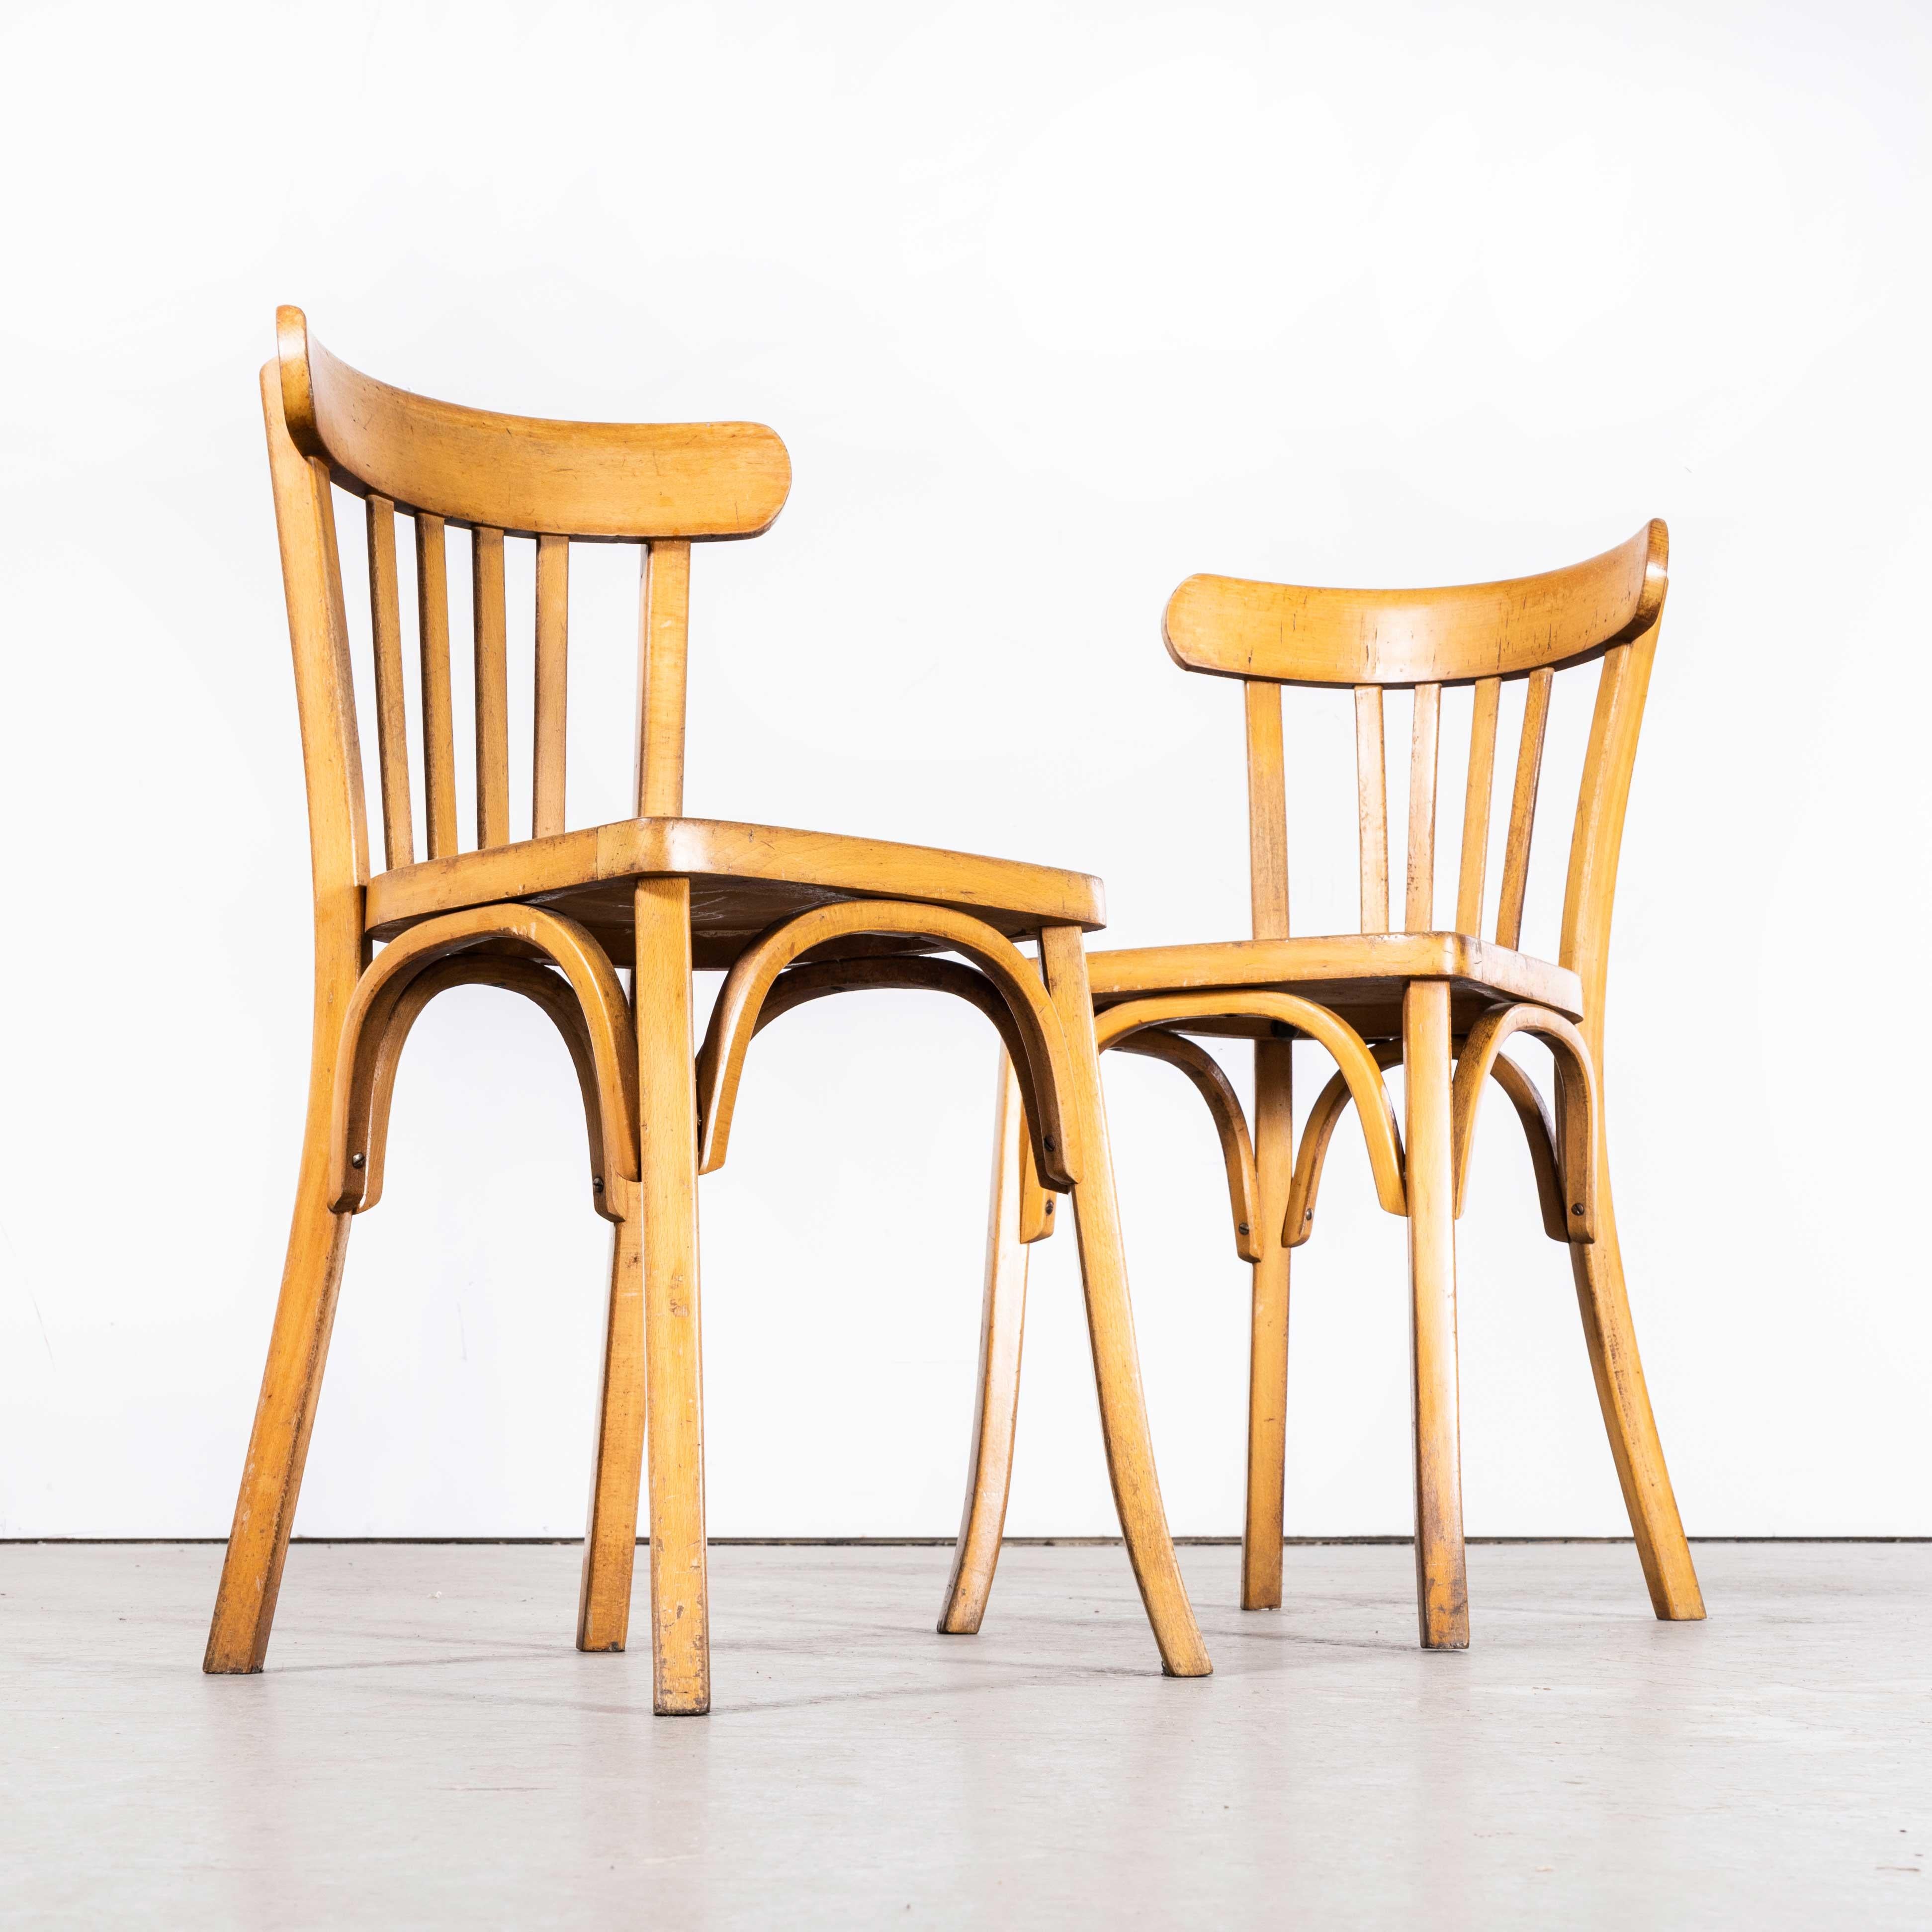 1950s Luterma Blonde Oak Bentwood Dining Chair - Set of Pair For Sale 4